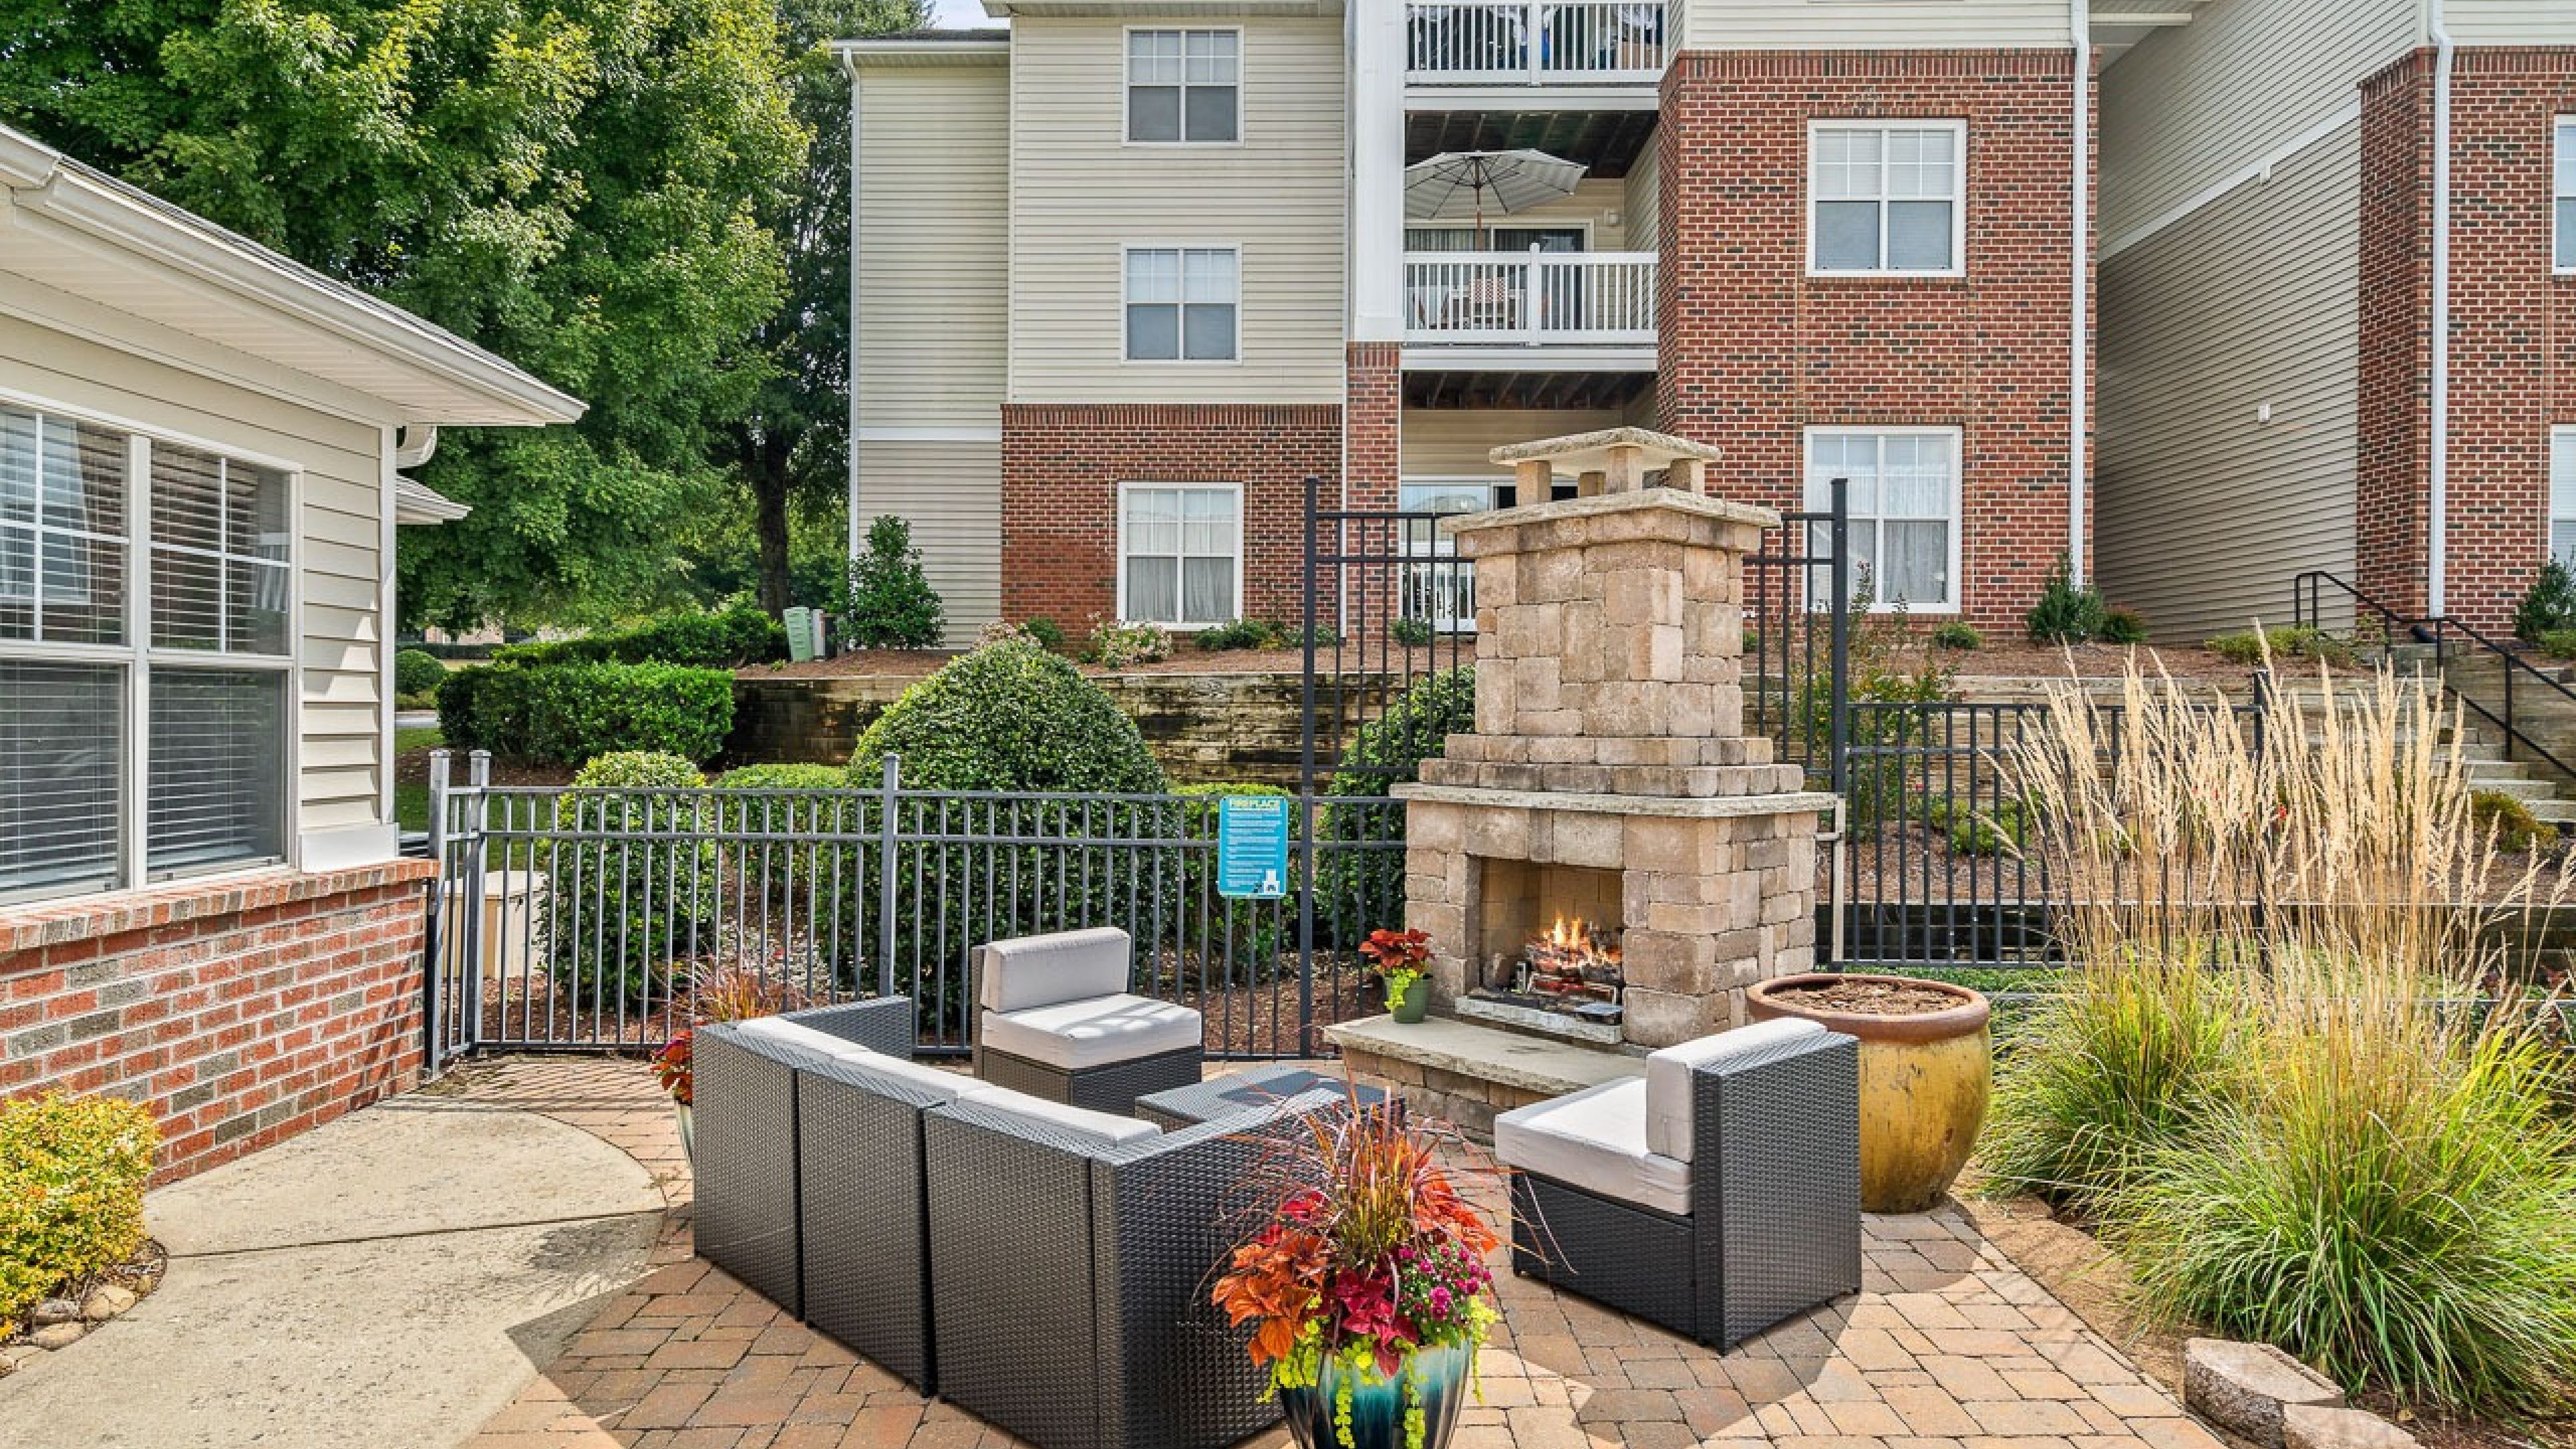 Hawthorne at Main apartments community exterior with outdoor fireplace lounge patio and landscaping